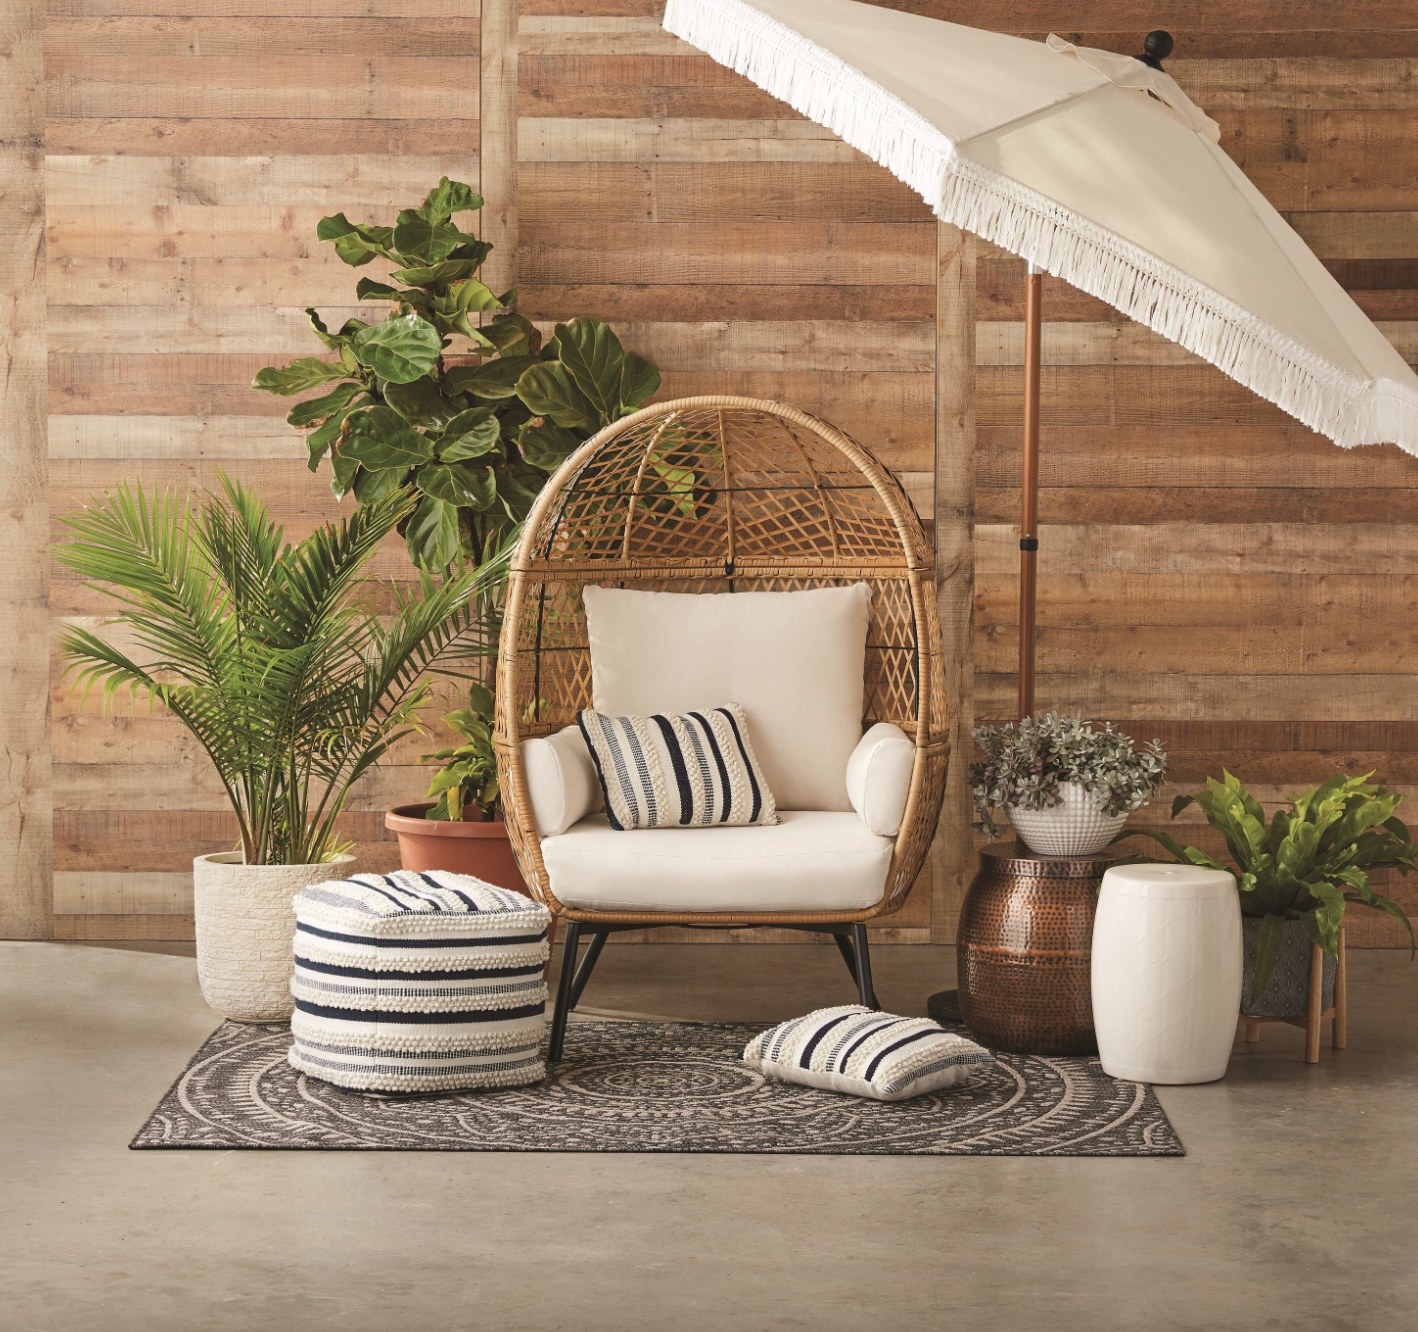 the tan rattan chair with white cushions in a decorated patio space